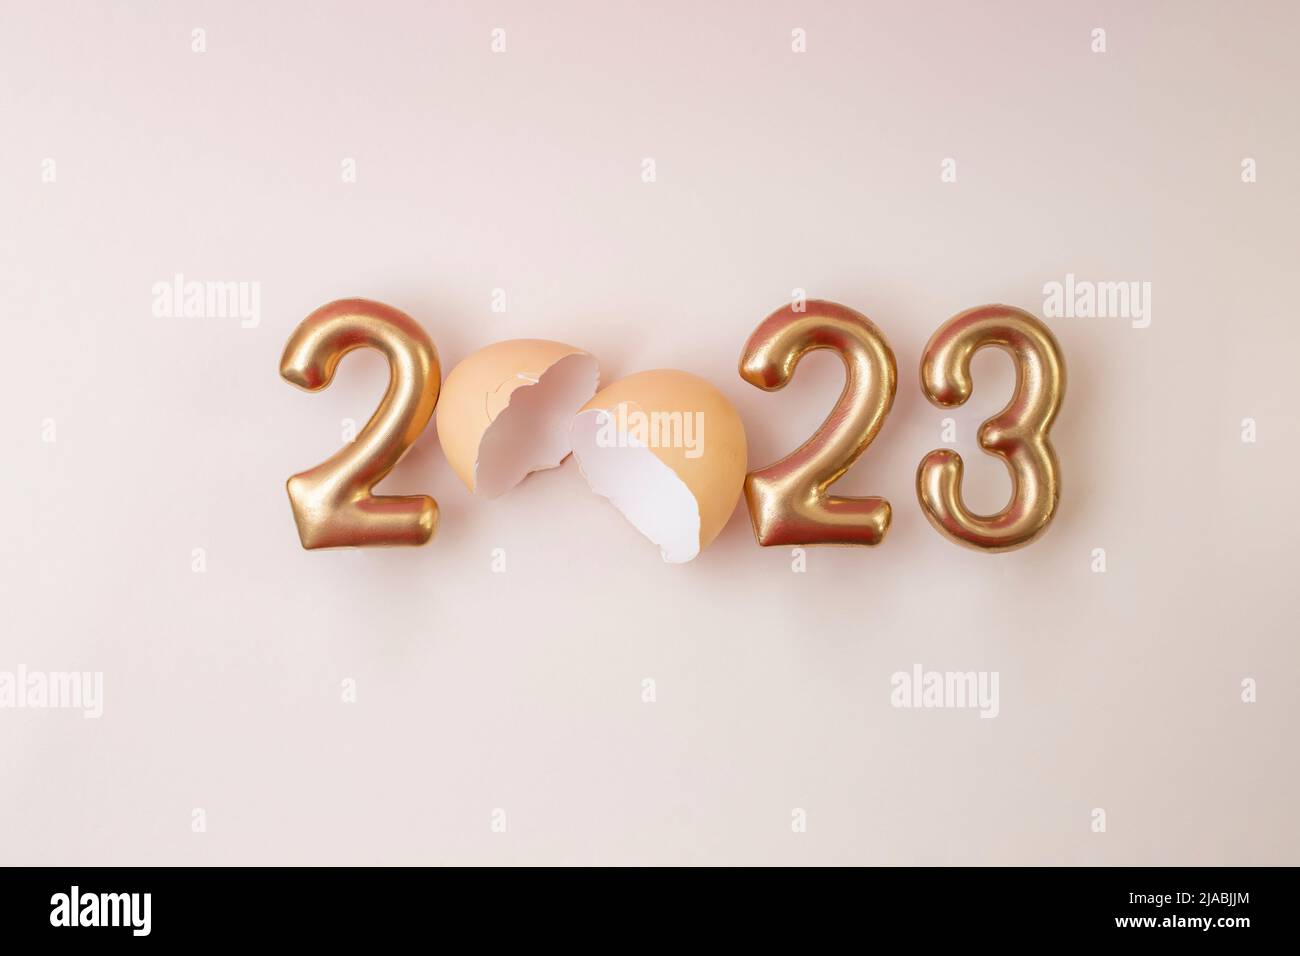 2023 written with golden letters and an egg shell, happy new year beige card design Stock Photo